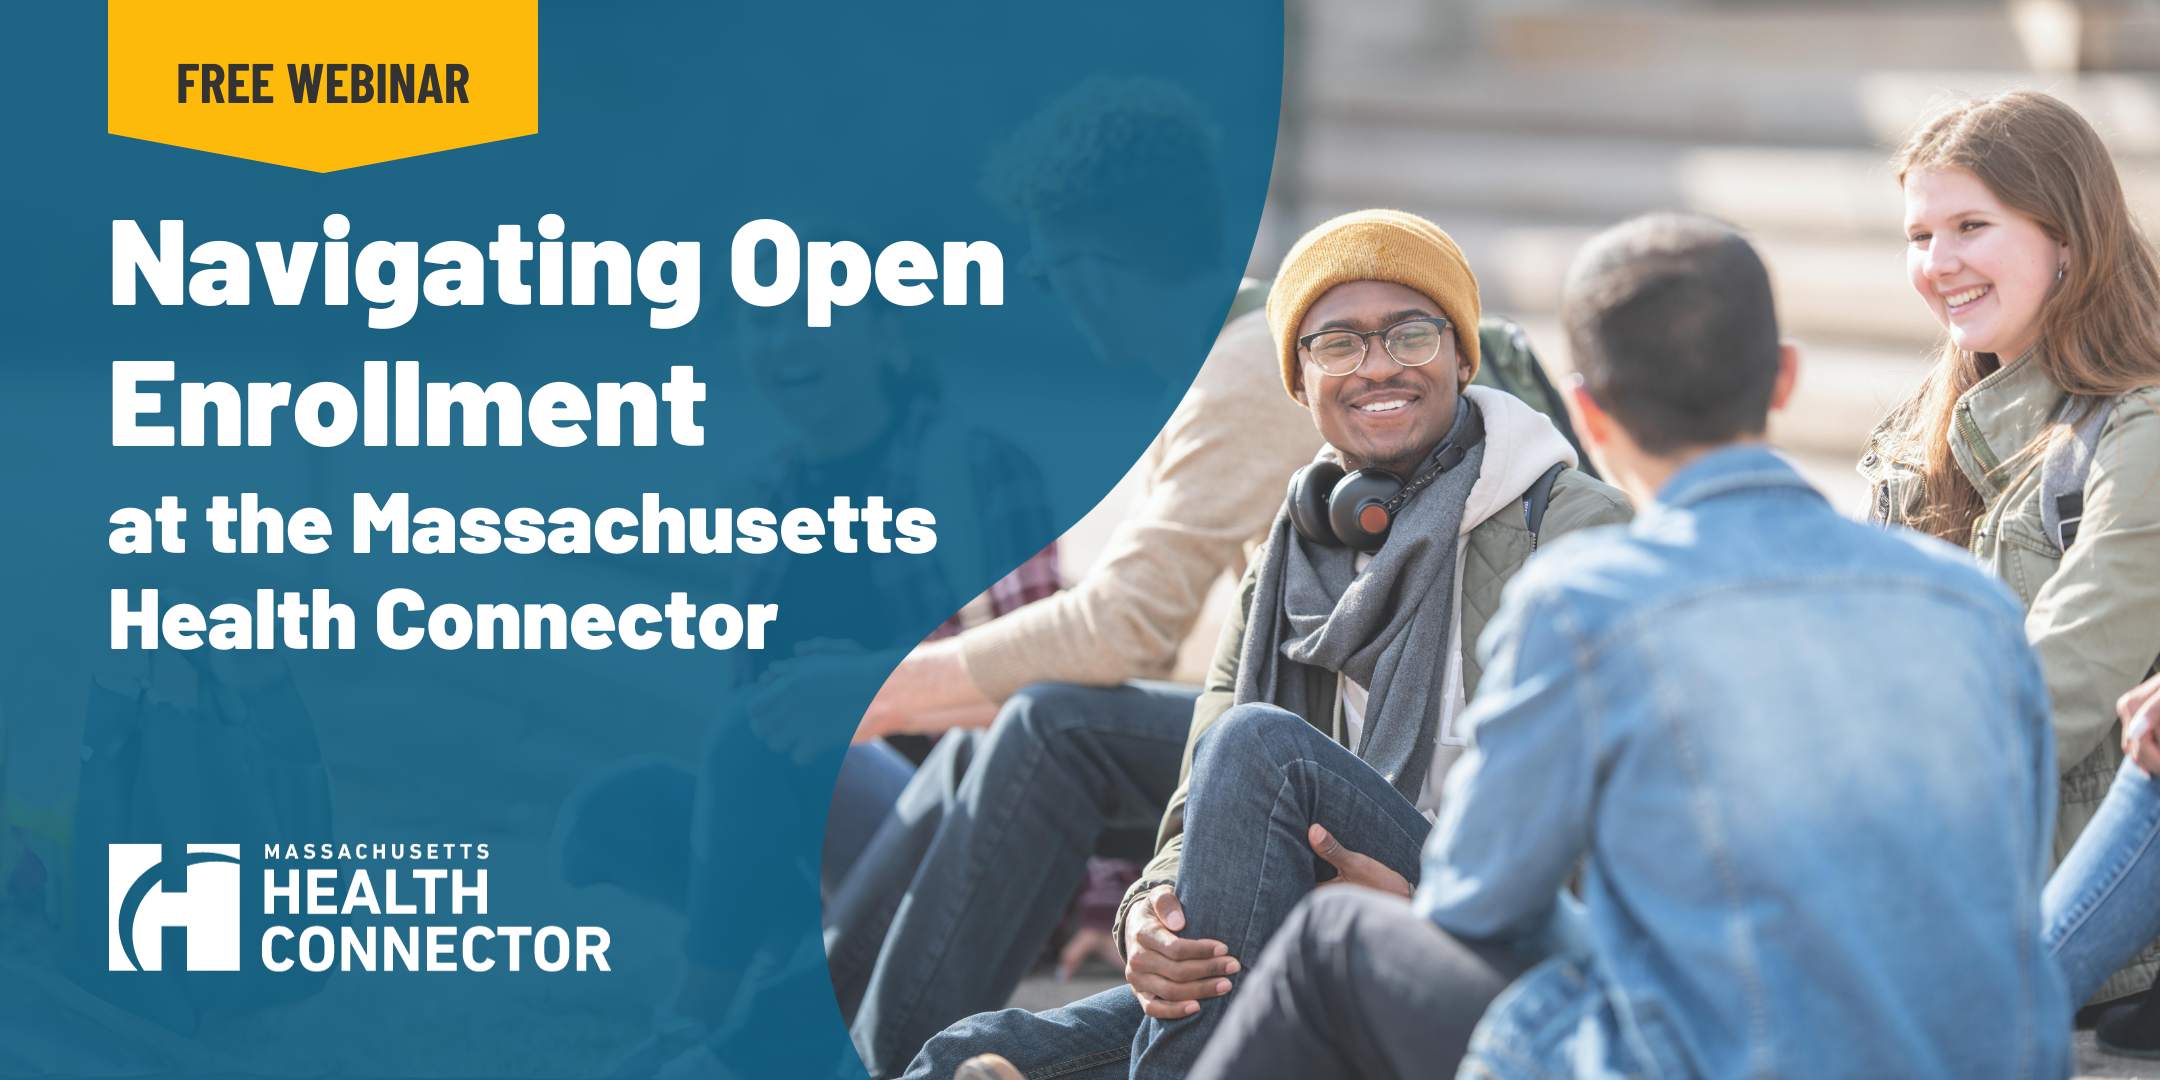 A diverse group of young people sitting outside on the steps of a building. Overlay text reads: Free Webinar. Navigating Open Enrollment at the Massachusetts Health Connector